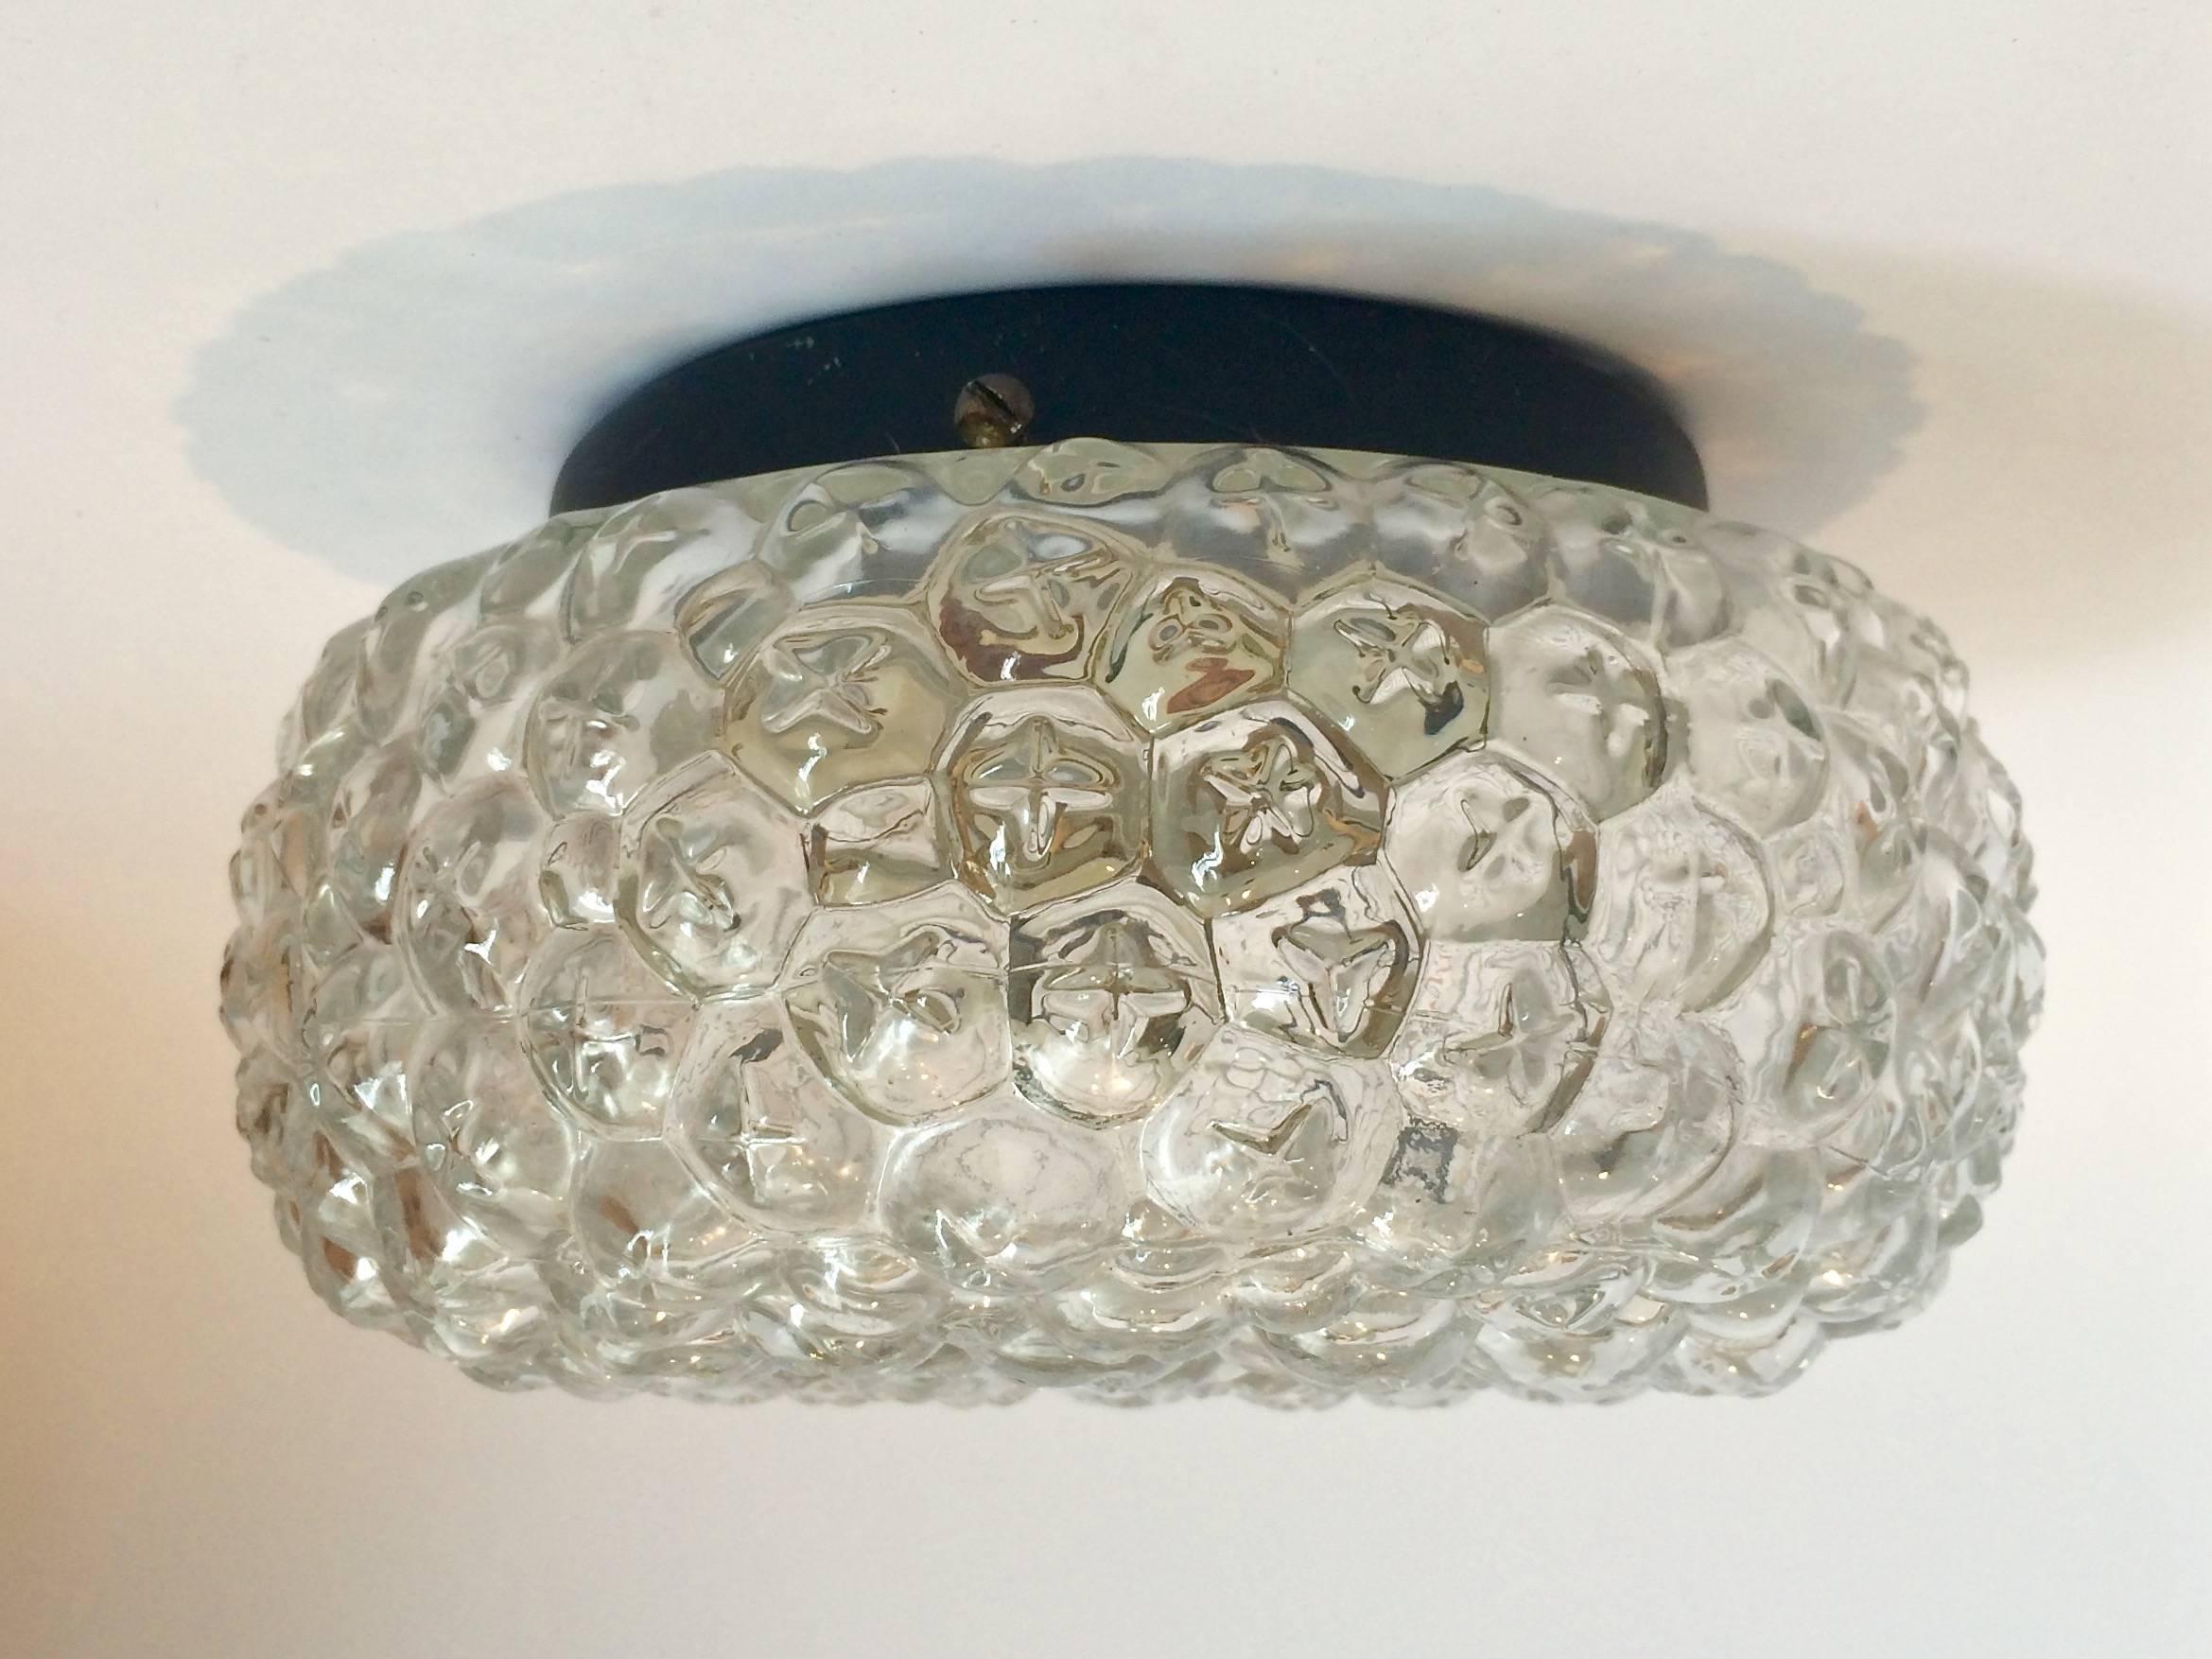 A bubble glass fixture that refracts light beautifully with a simple black metal mounting base in the manner of Helena Tynell. Can be mounted to the ceiling or the wall. Takes one 60 Watt bulb.